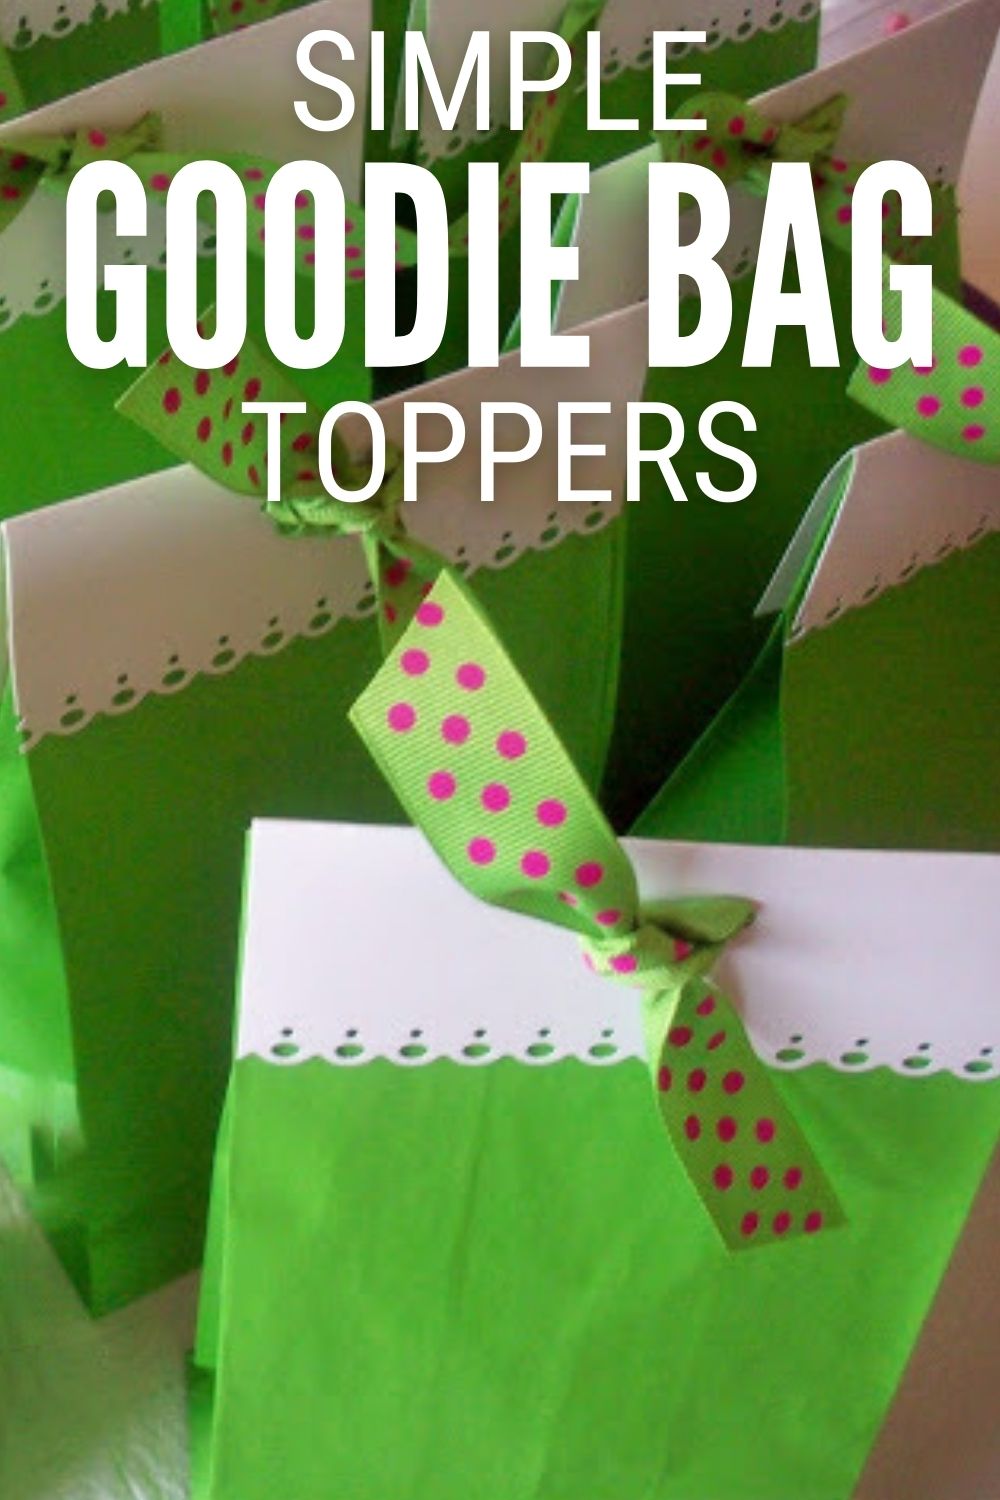 How To Make Cute Goodie Bags that are Fast and Easy